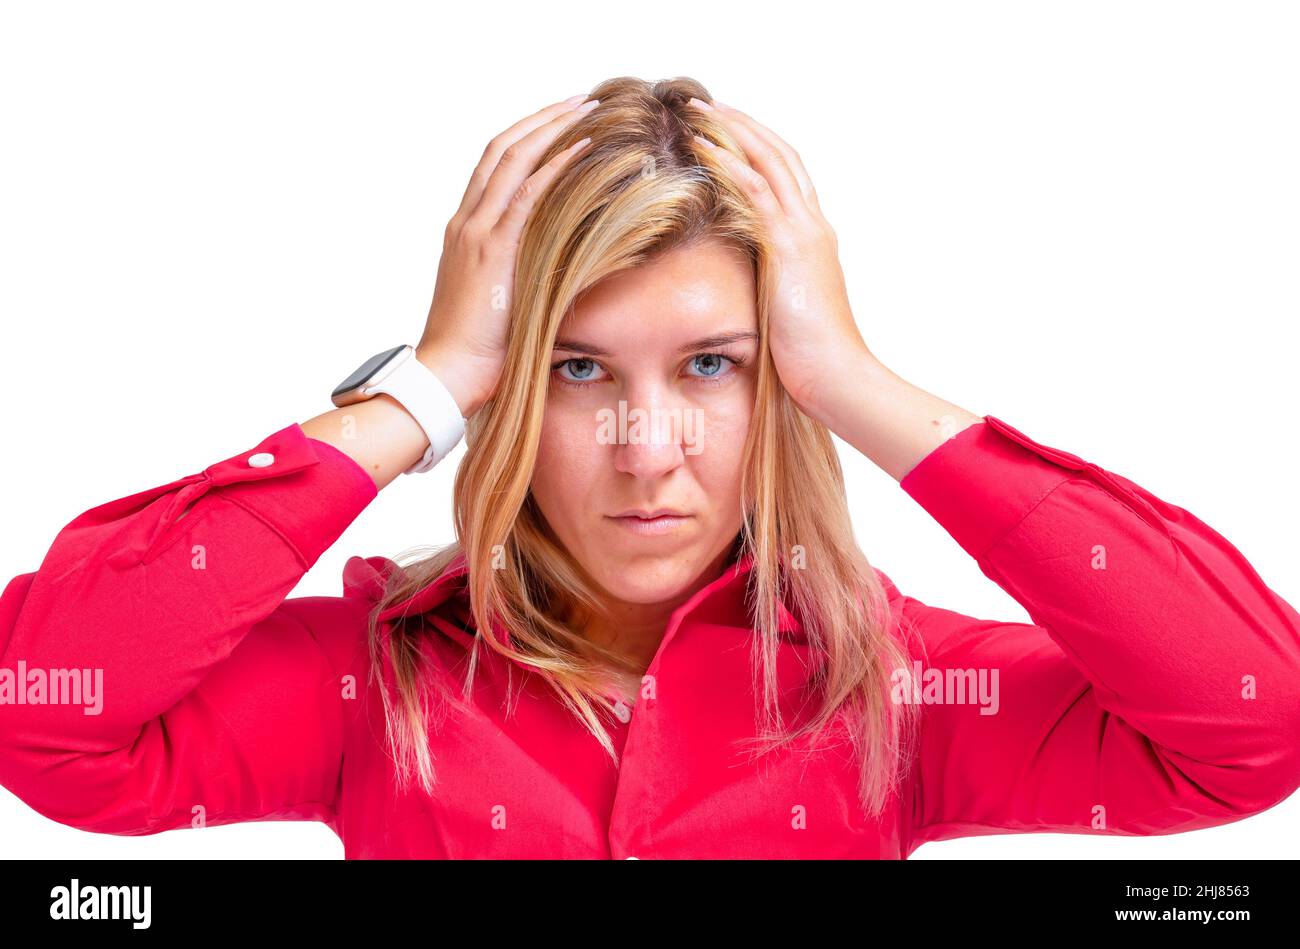 Young woman holding hands on head headache anger isolated on white background Stock Photo